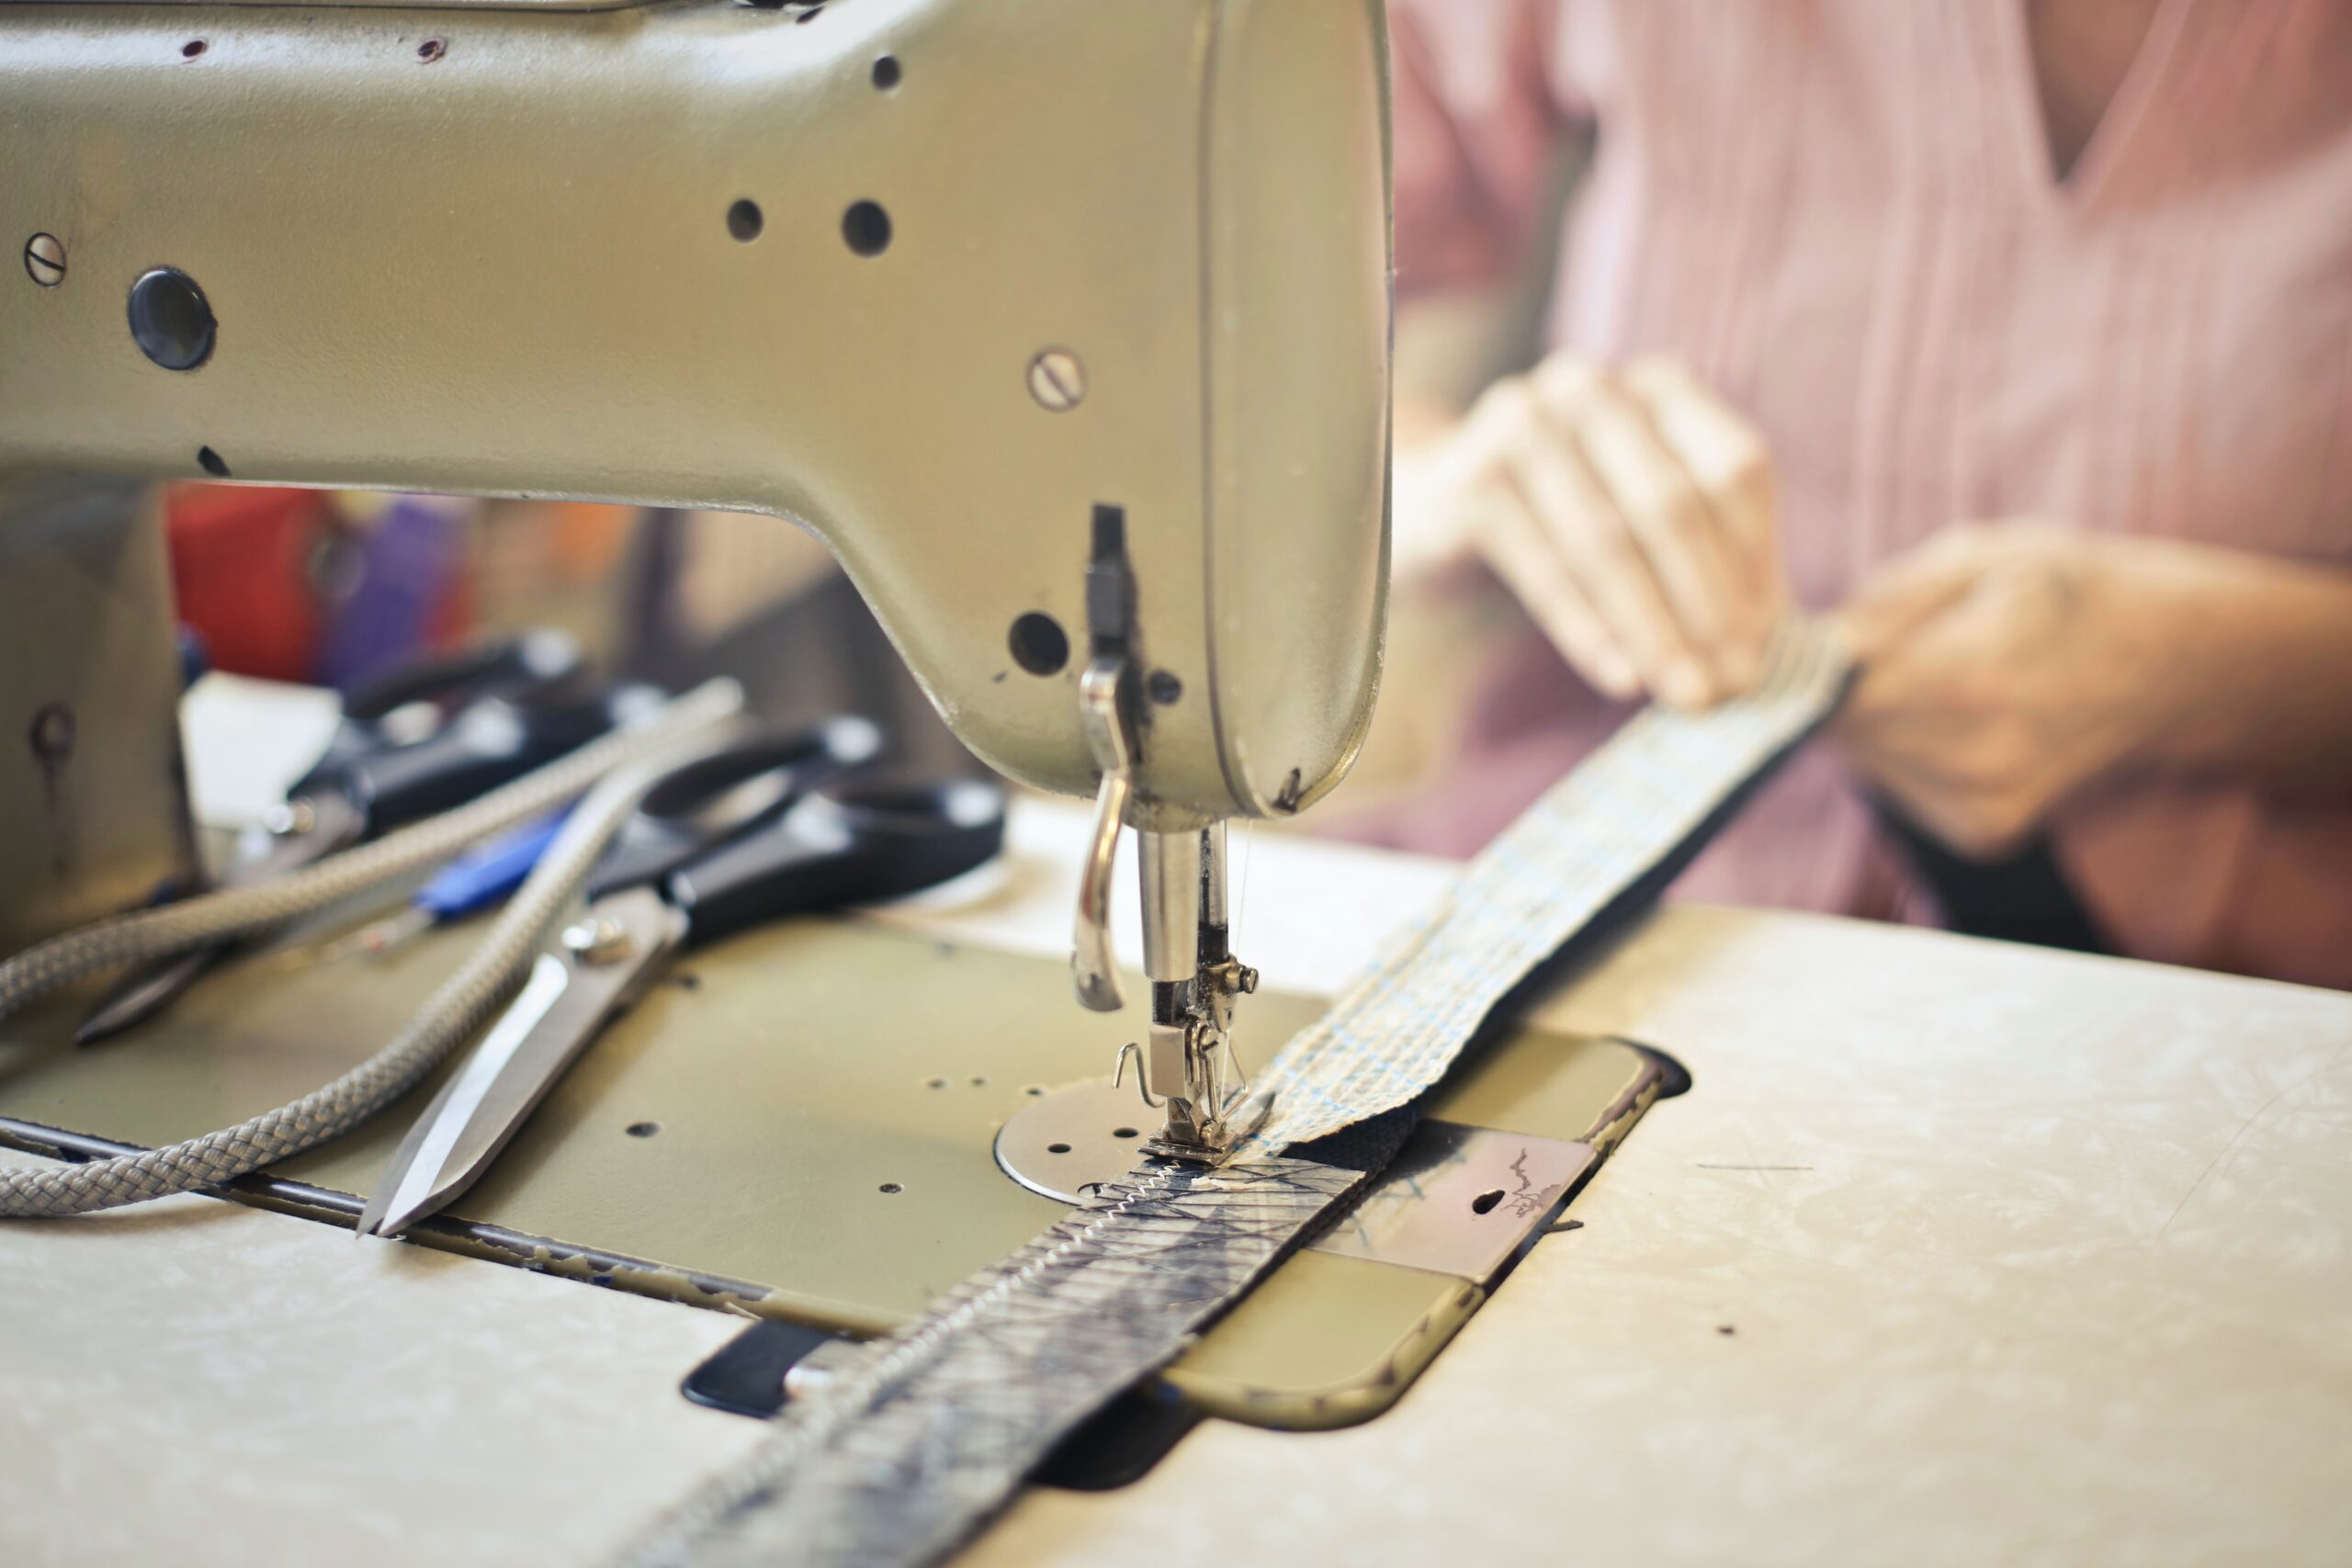 Contract for garment processing in Vietnam